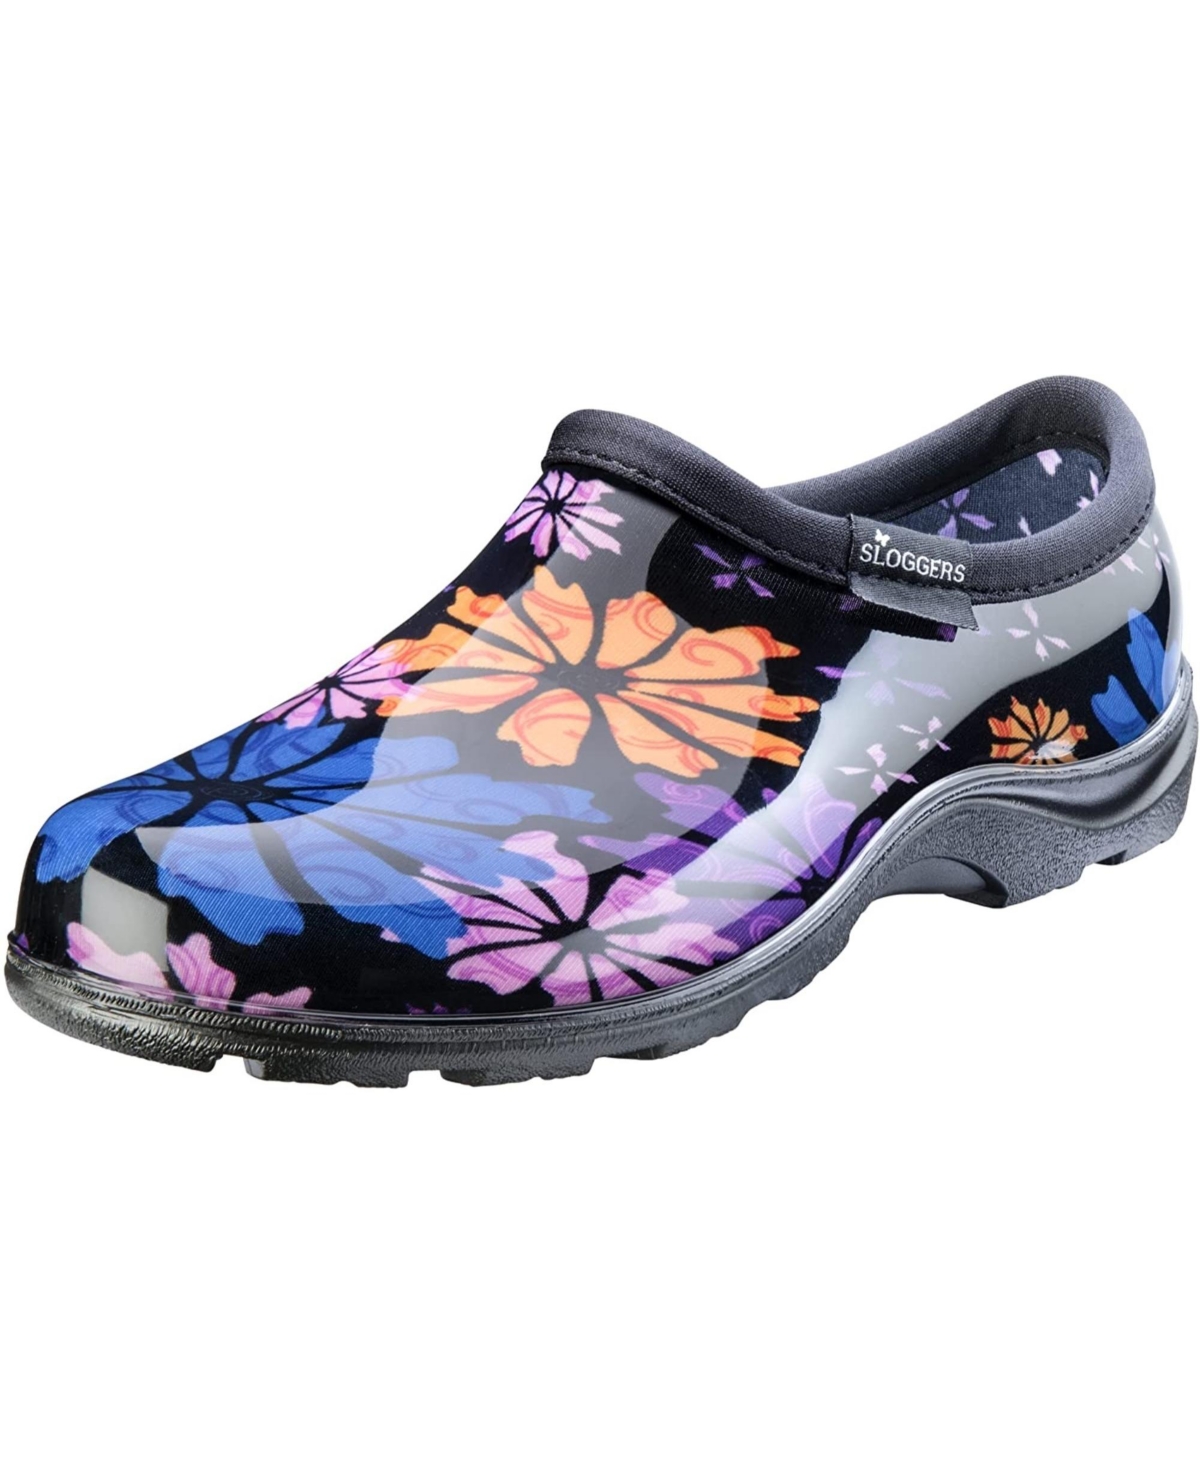 Sloggers Womens Rain And Garden Shoes, Flower Power Print, Size 8 In Multi